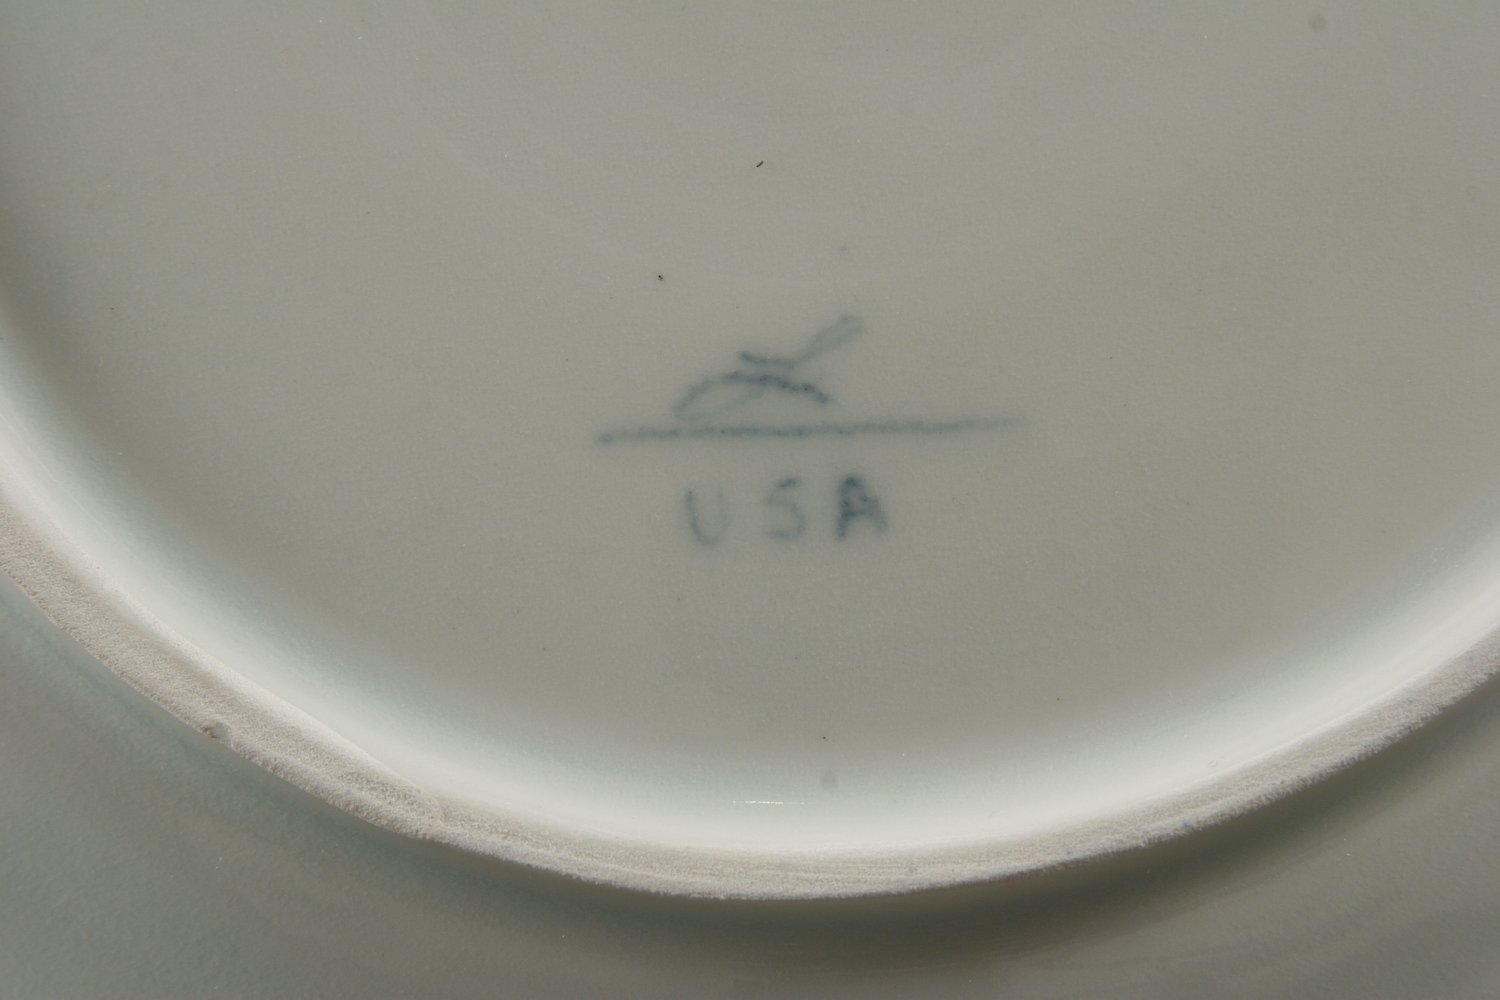 USA on back of "Find China" plate